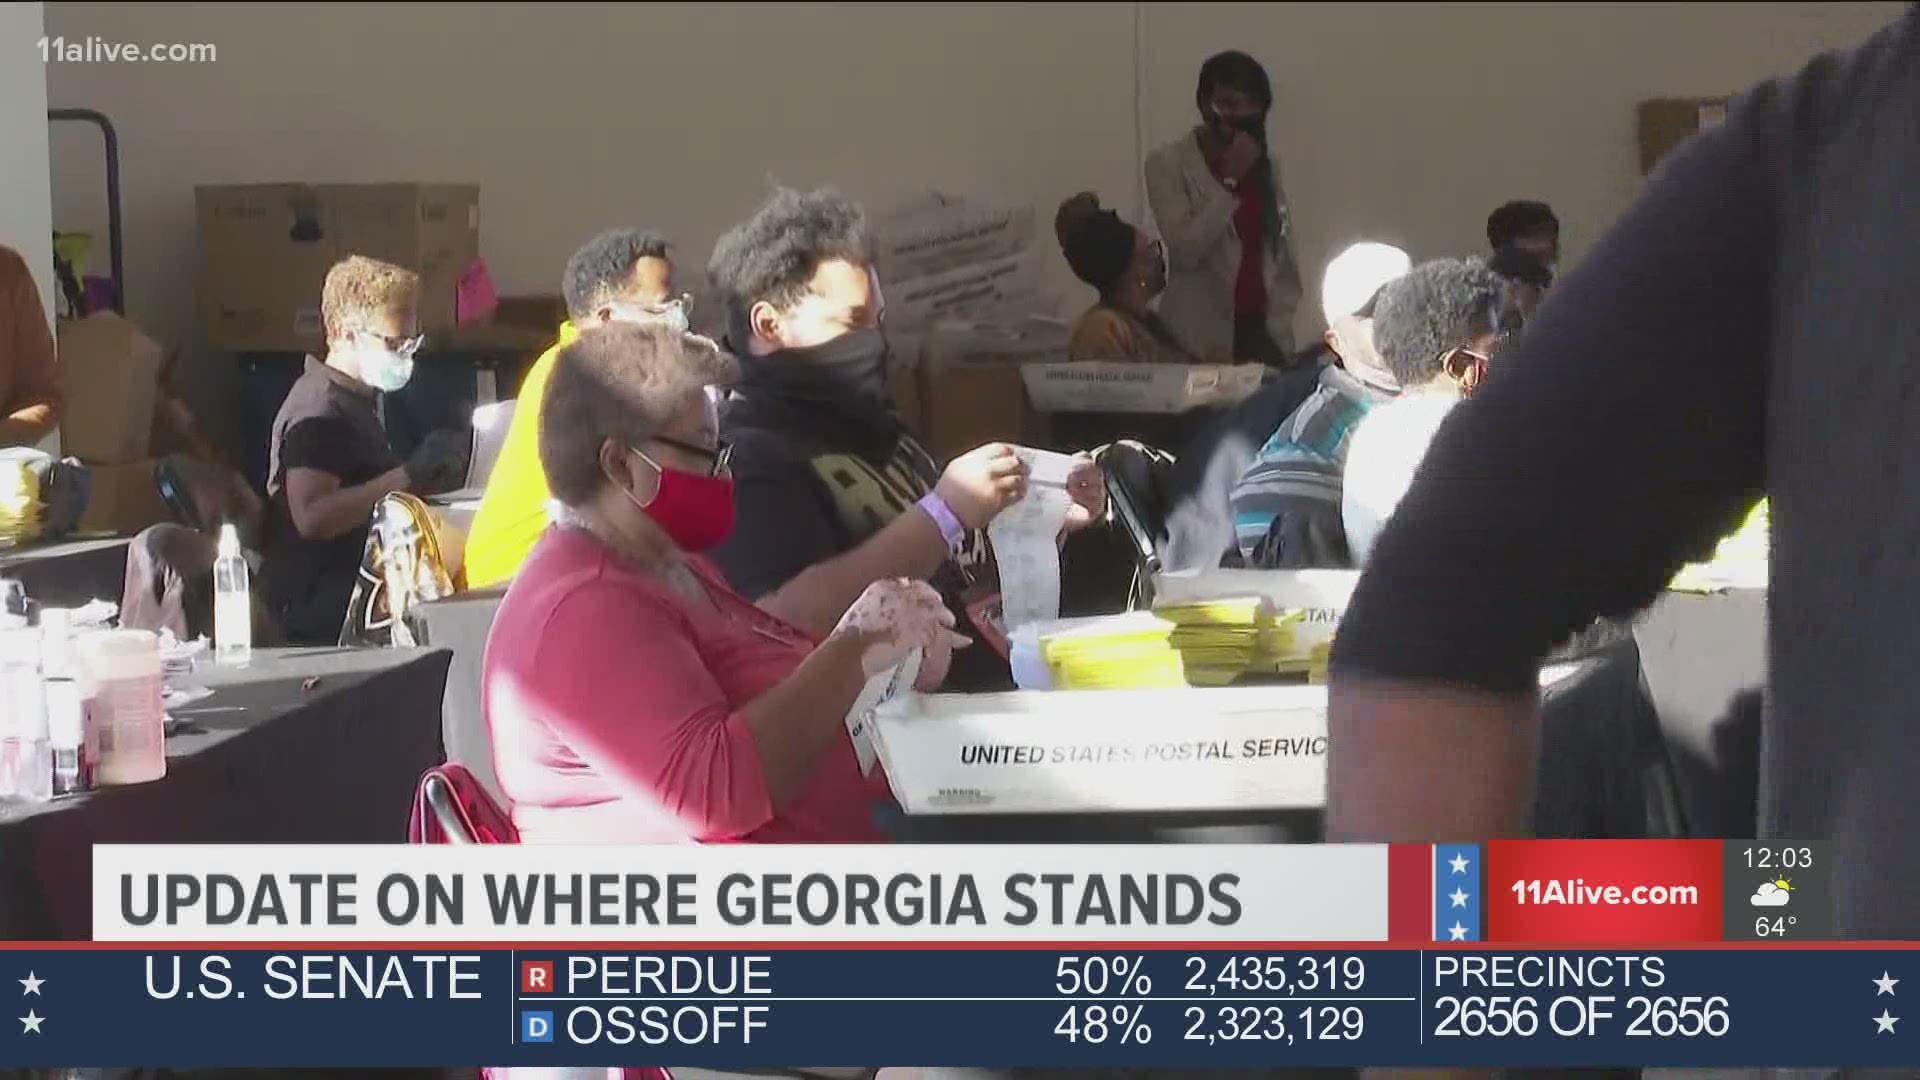 Georgia officials said the state has about 60,000 outstanding ballots.